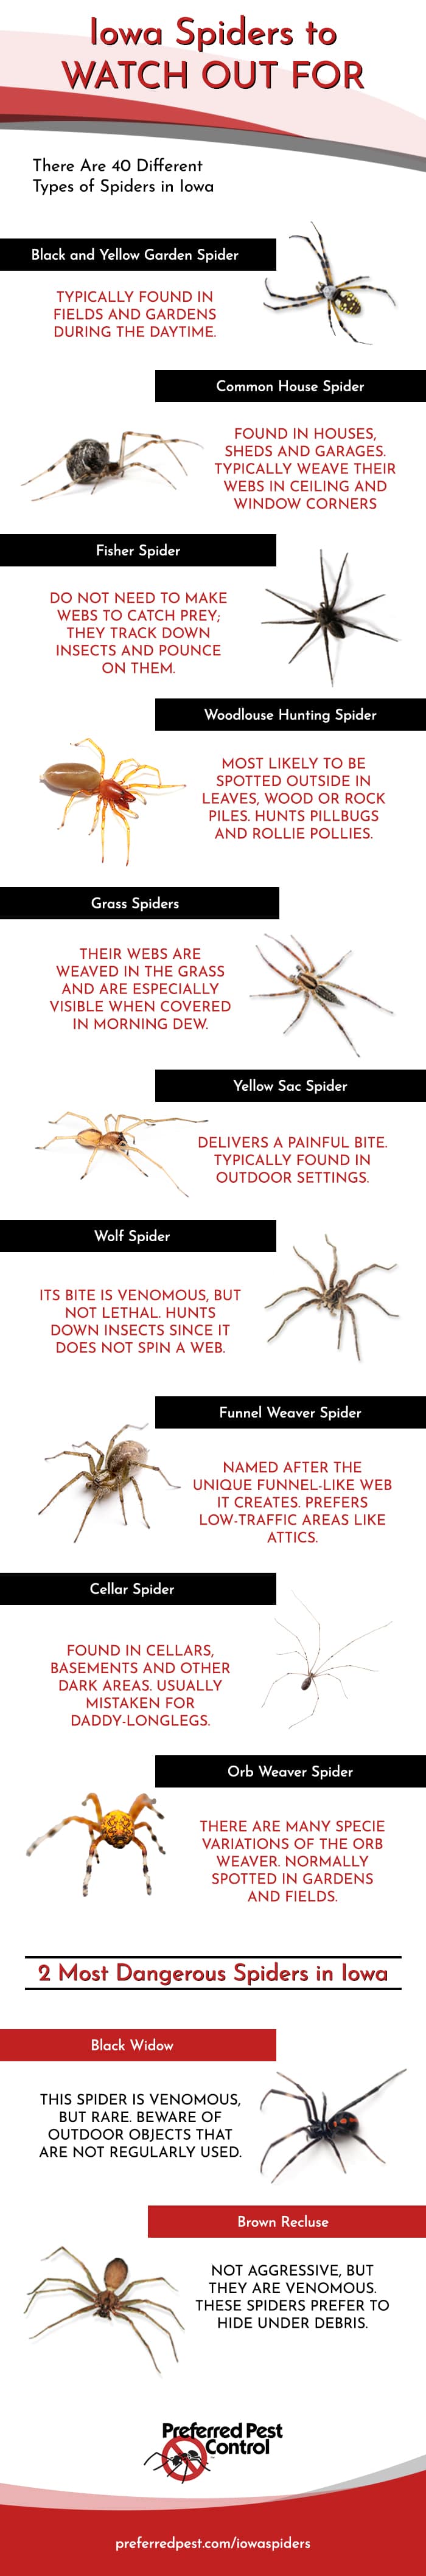 Spiders in Iowa Infographic